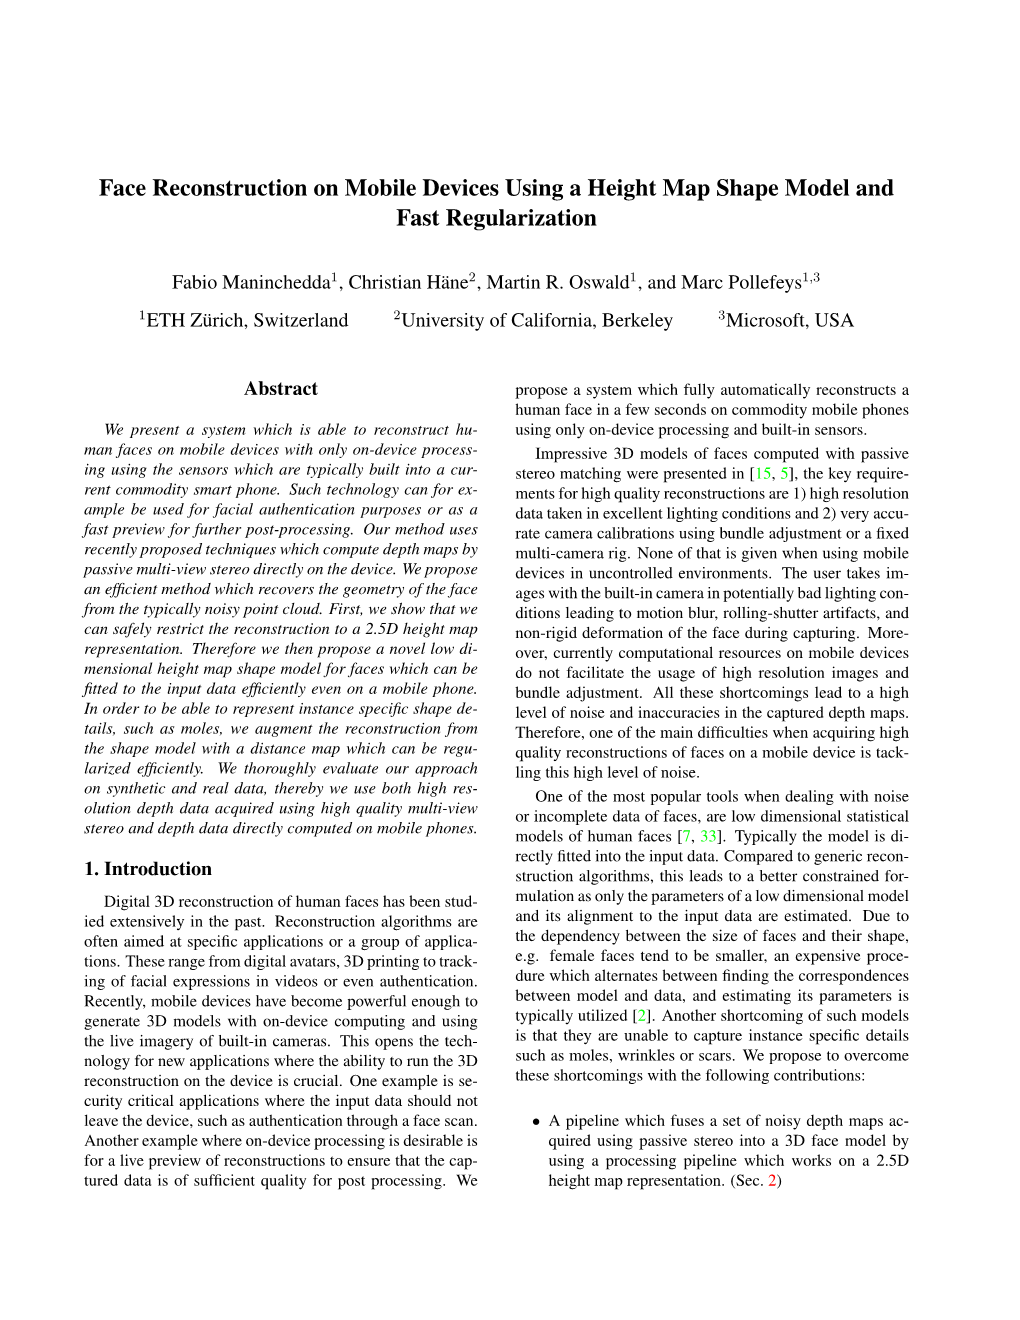 Face Reconstruction on Mobile Devices Using a Height Map Shape Model and Fast Regularization